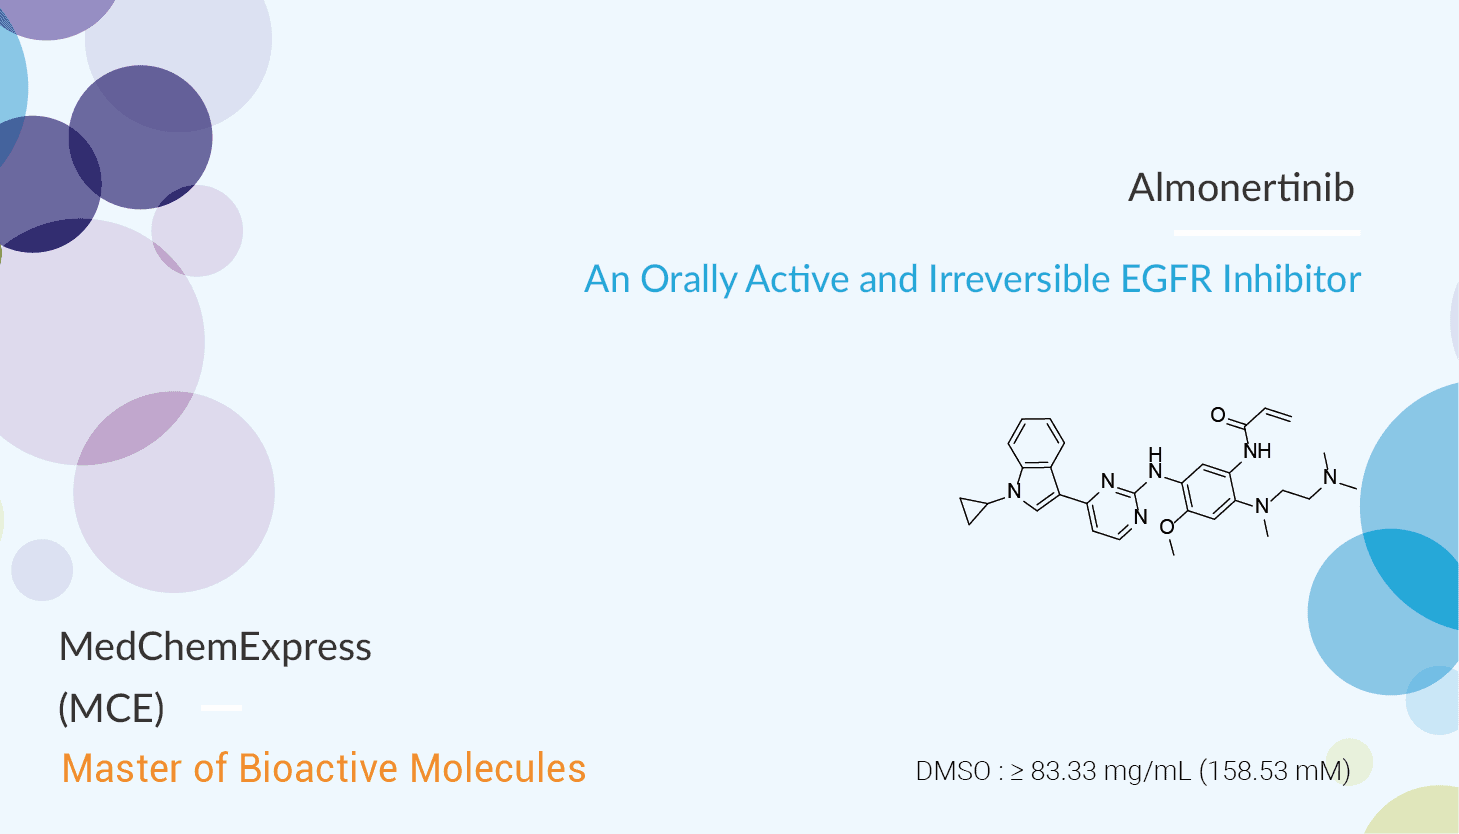 Almonertinib is an Orally Active and Irreversible EGFR Inhibitor